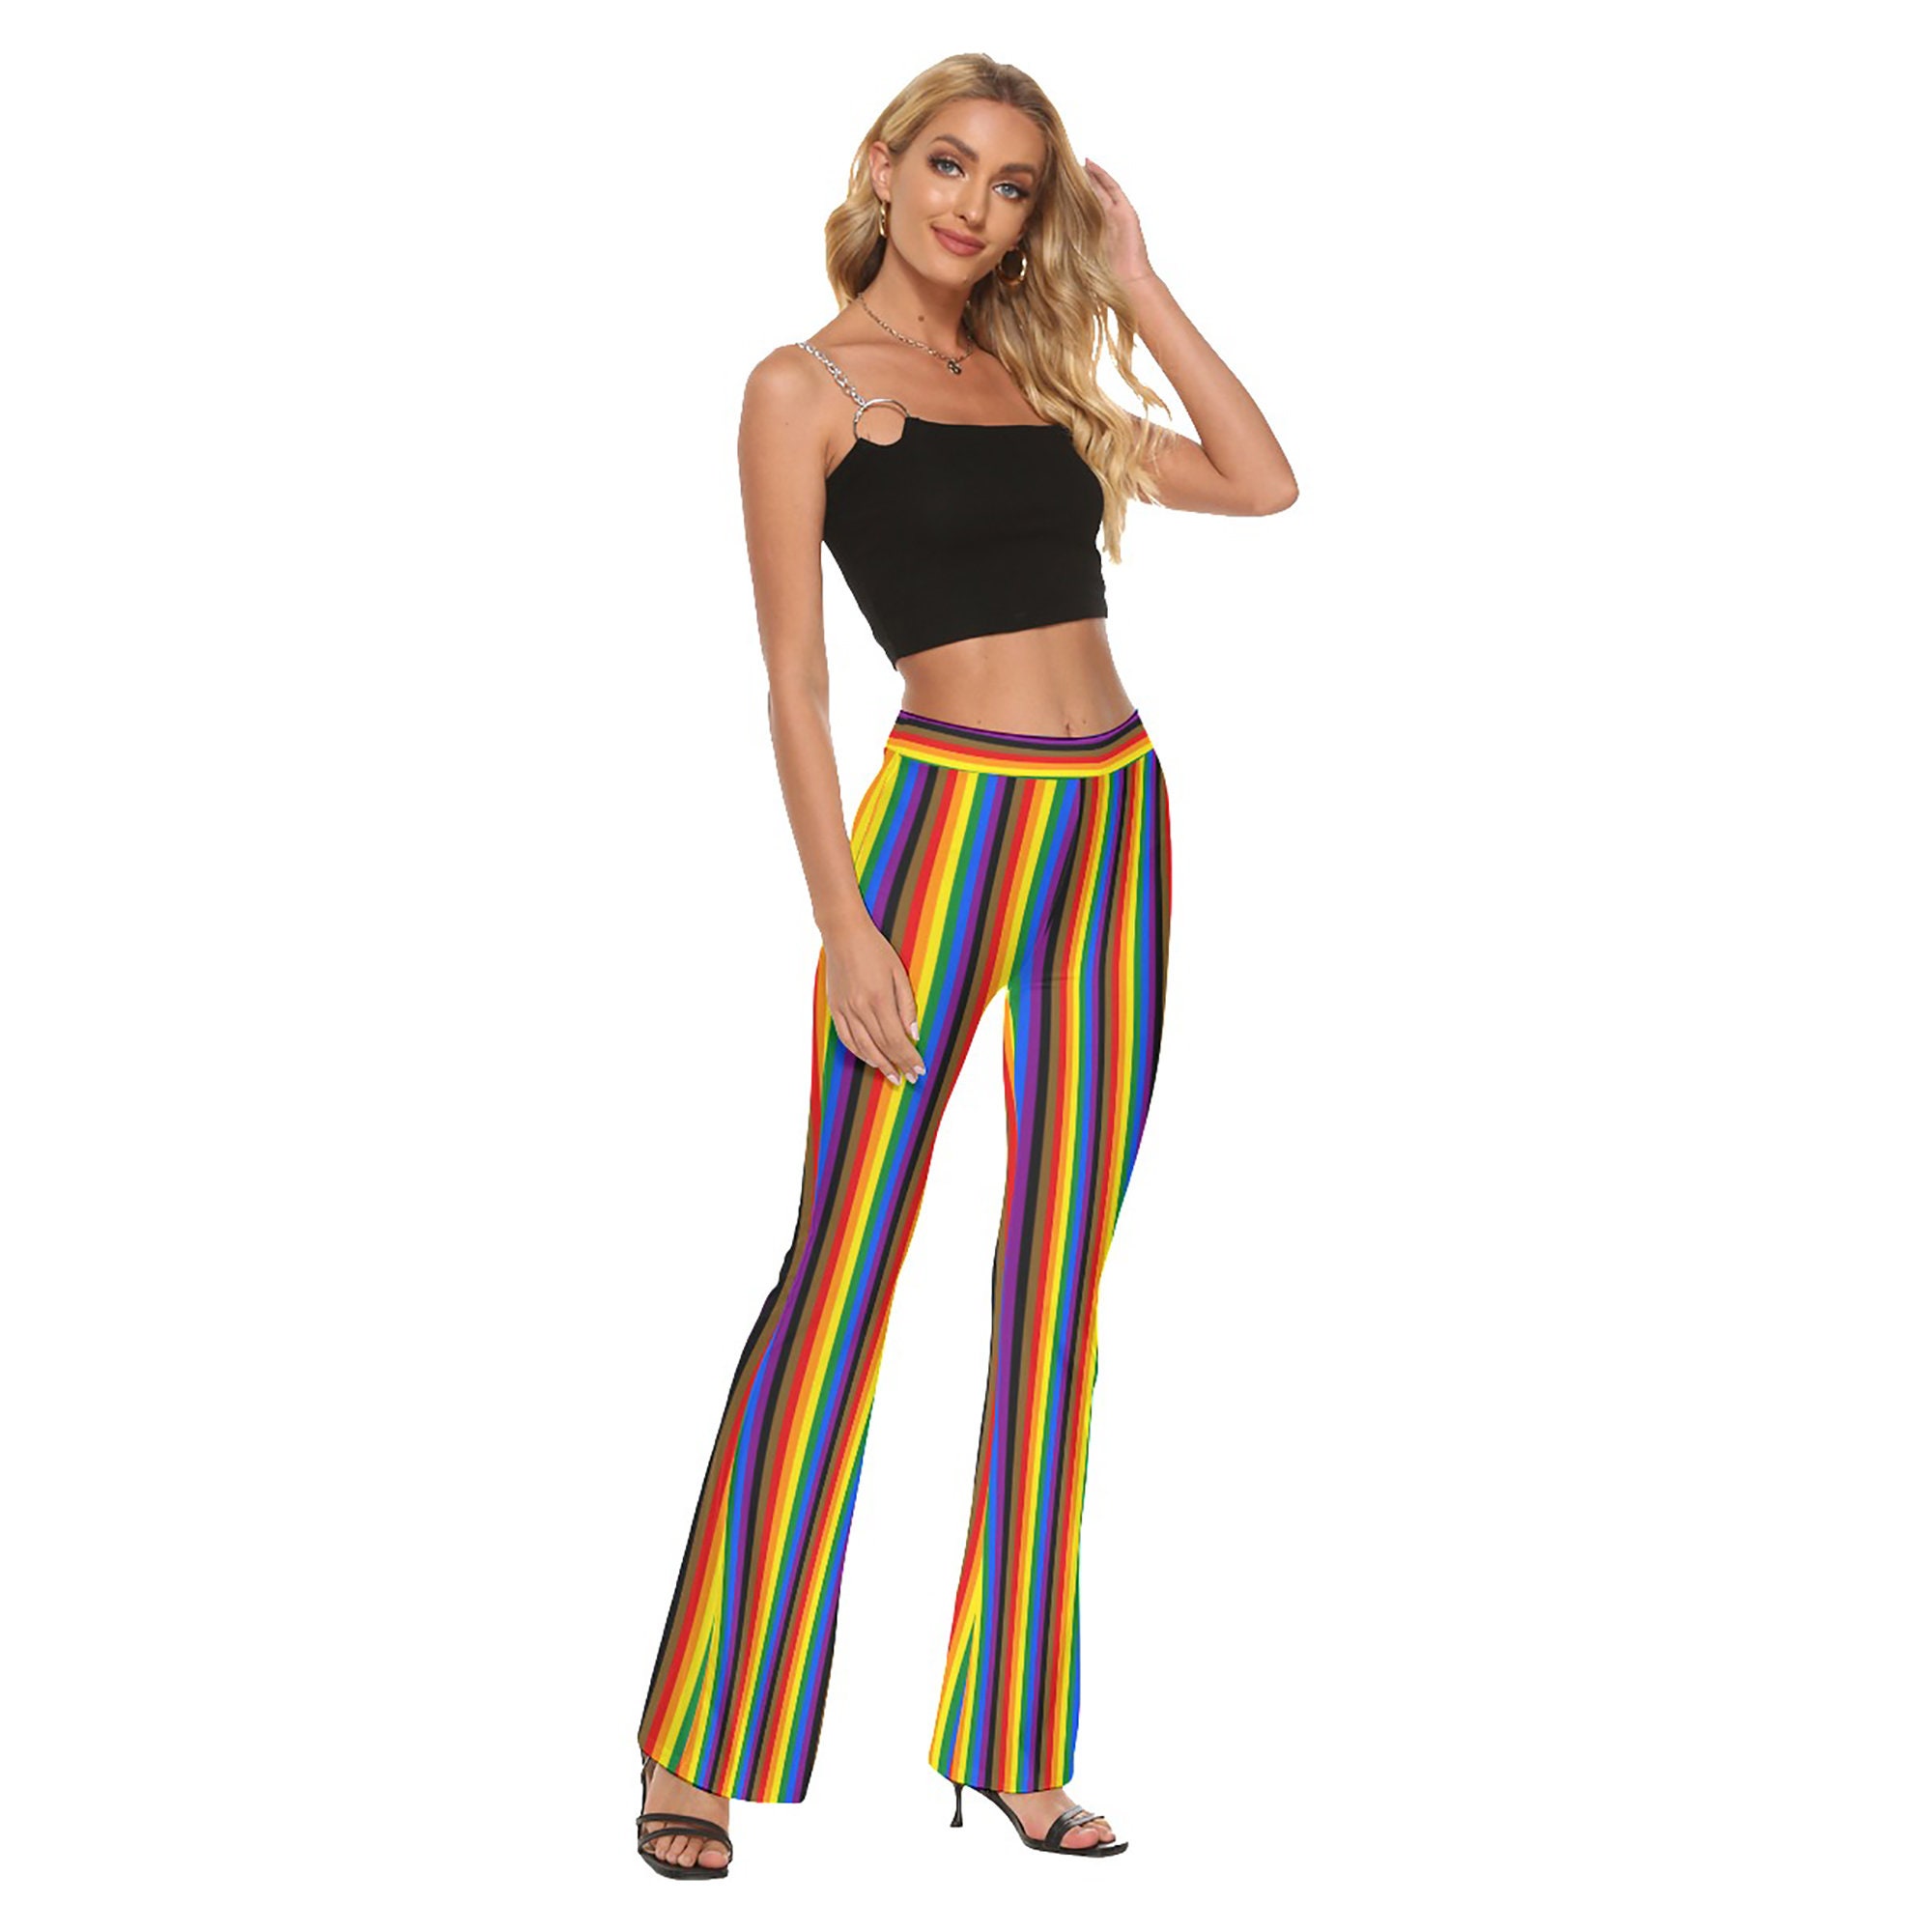 Rainbow Pride Skinny Flare Pants, Stripes in Colors of Philly Rainbow Pride  Flag, Gay Pride, BLM, LGBT Clothing, Gift for Gay or Cis 